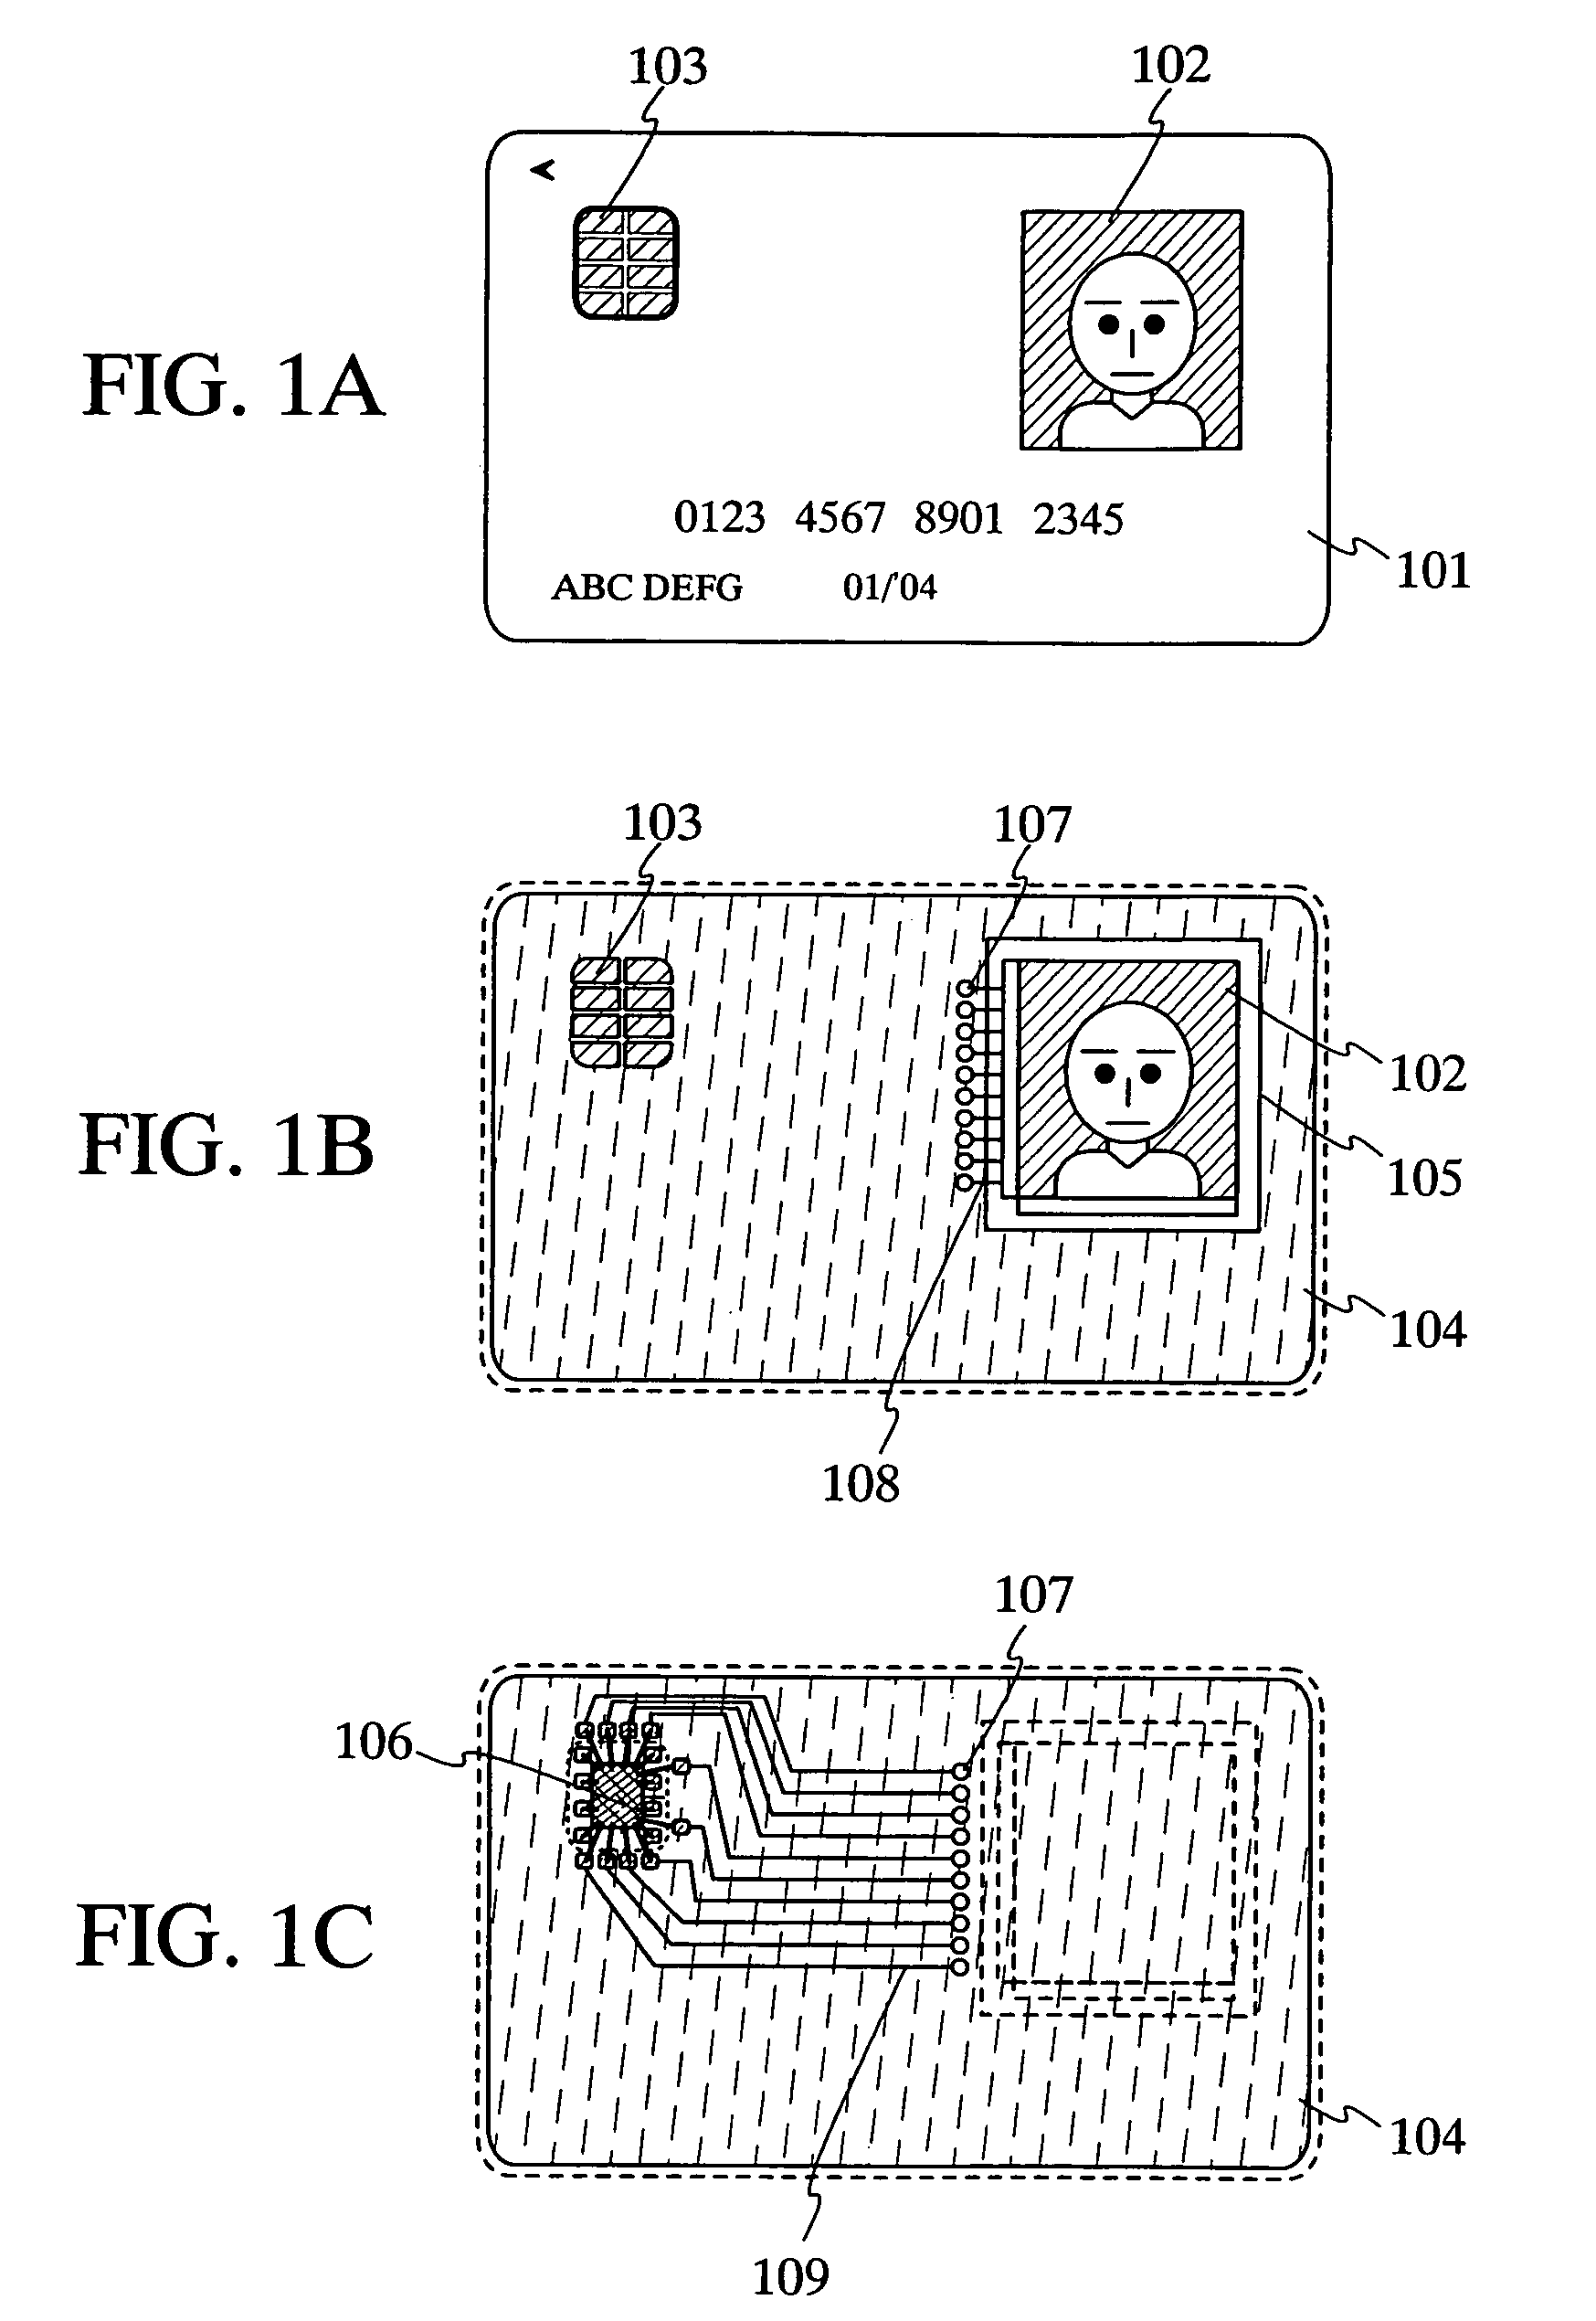 Article having display device